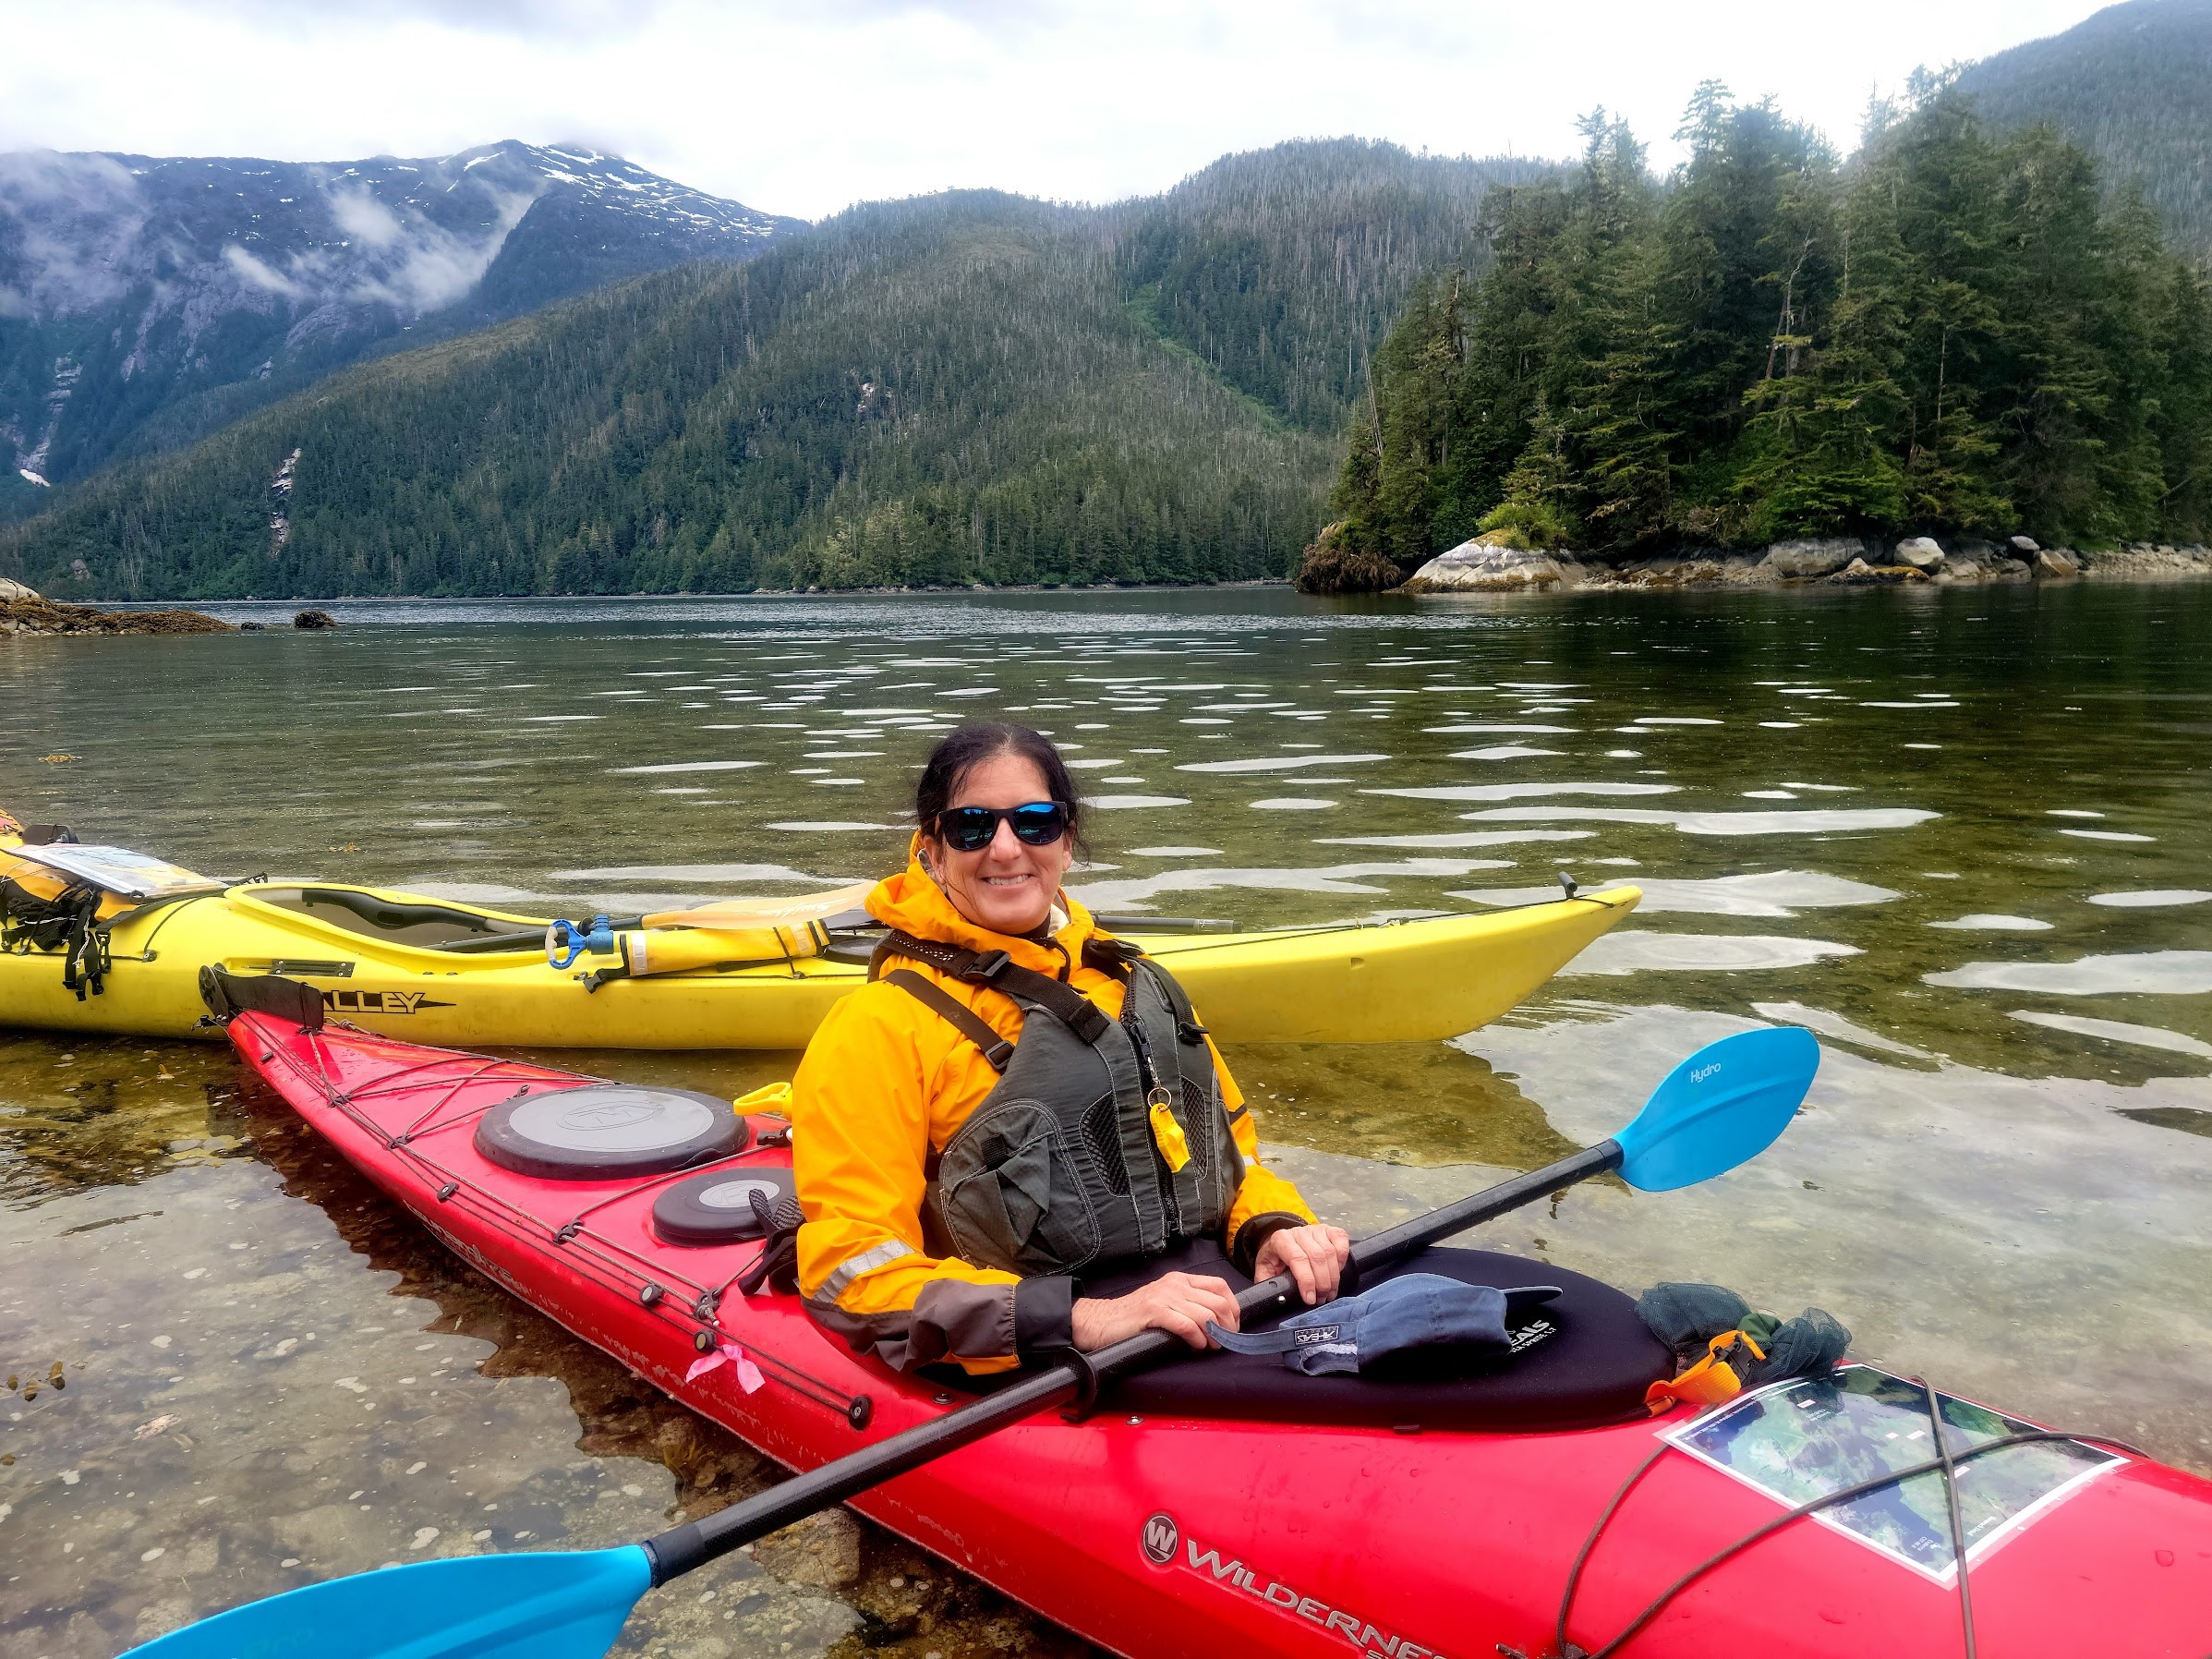 Cynthia Whalen-Nelson kayaking in the Tongass